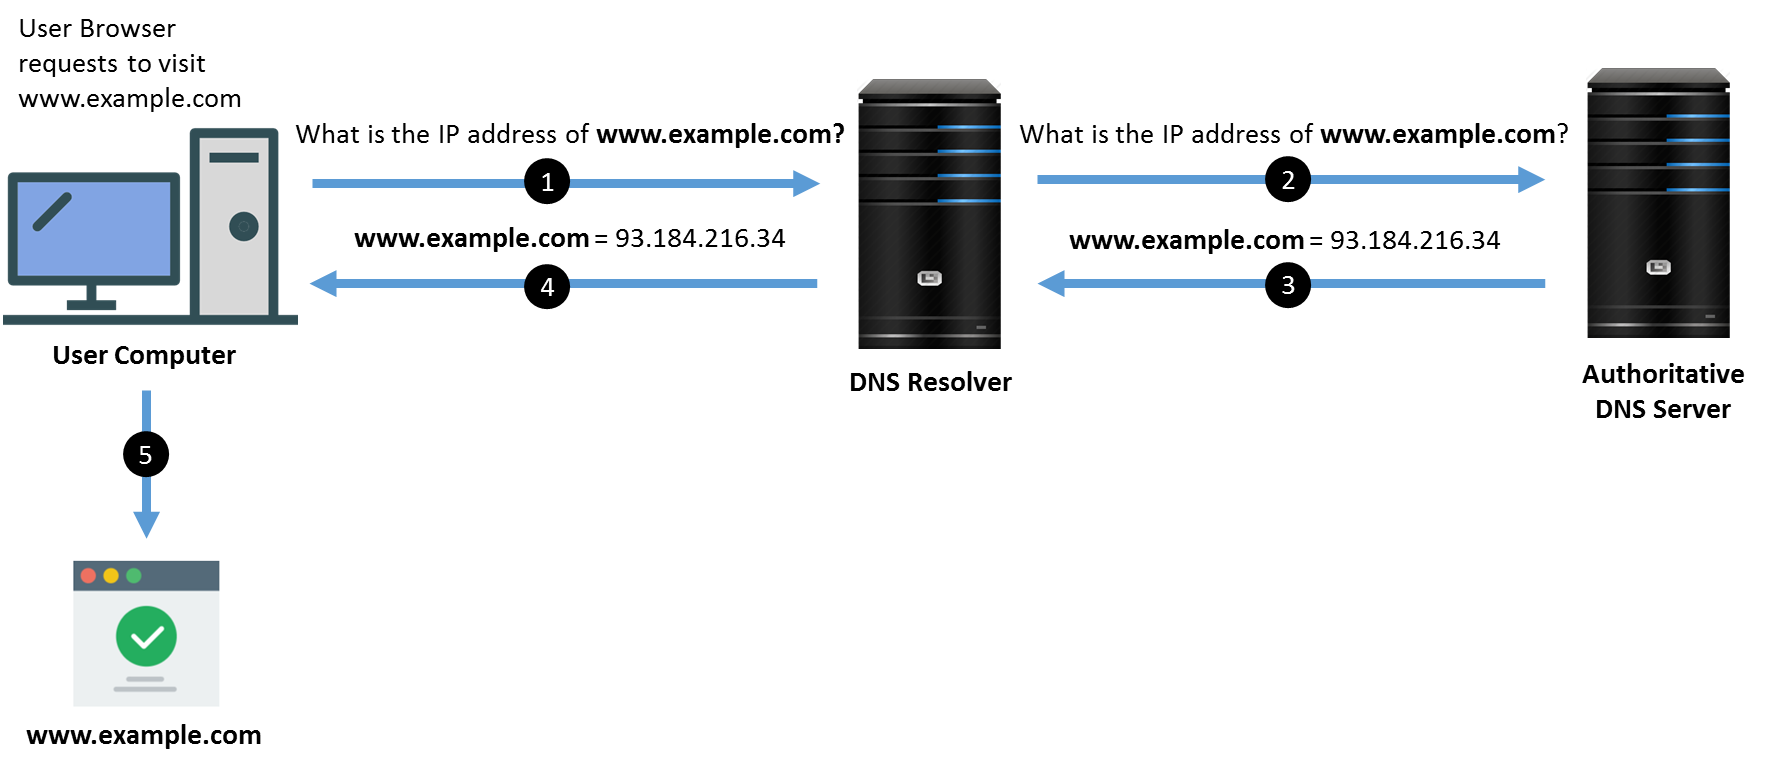 Illustration of how DNS works